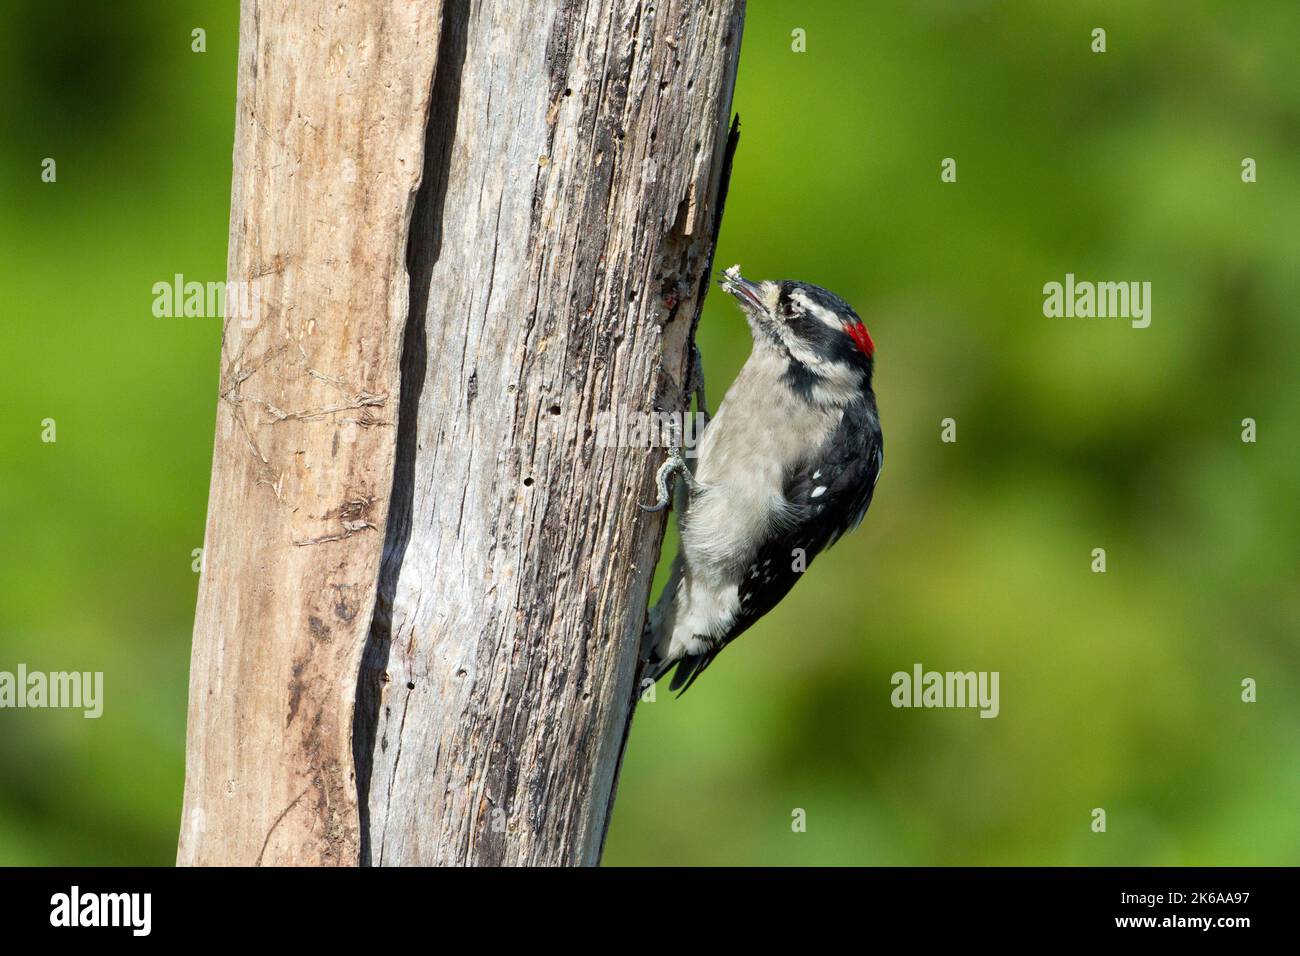 A male Downy woodpecker (Dryobates pubescens) feeding on suet at a dead tree stump in a garden in Nanaimo, British Columbia, Canada Stock Photo